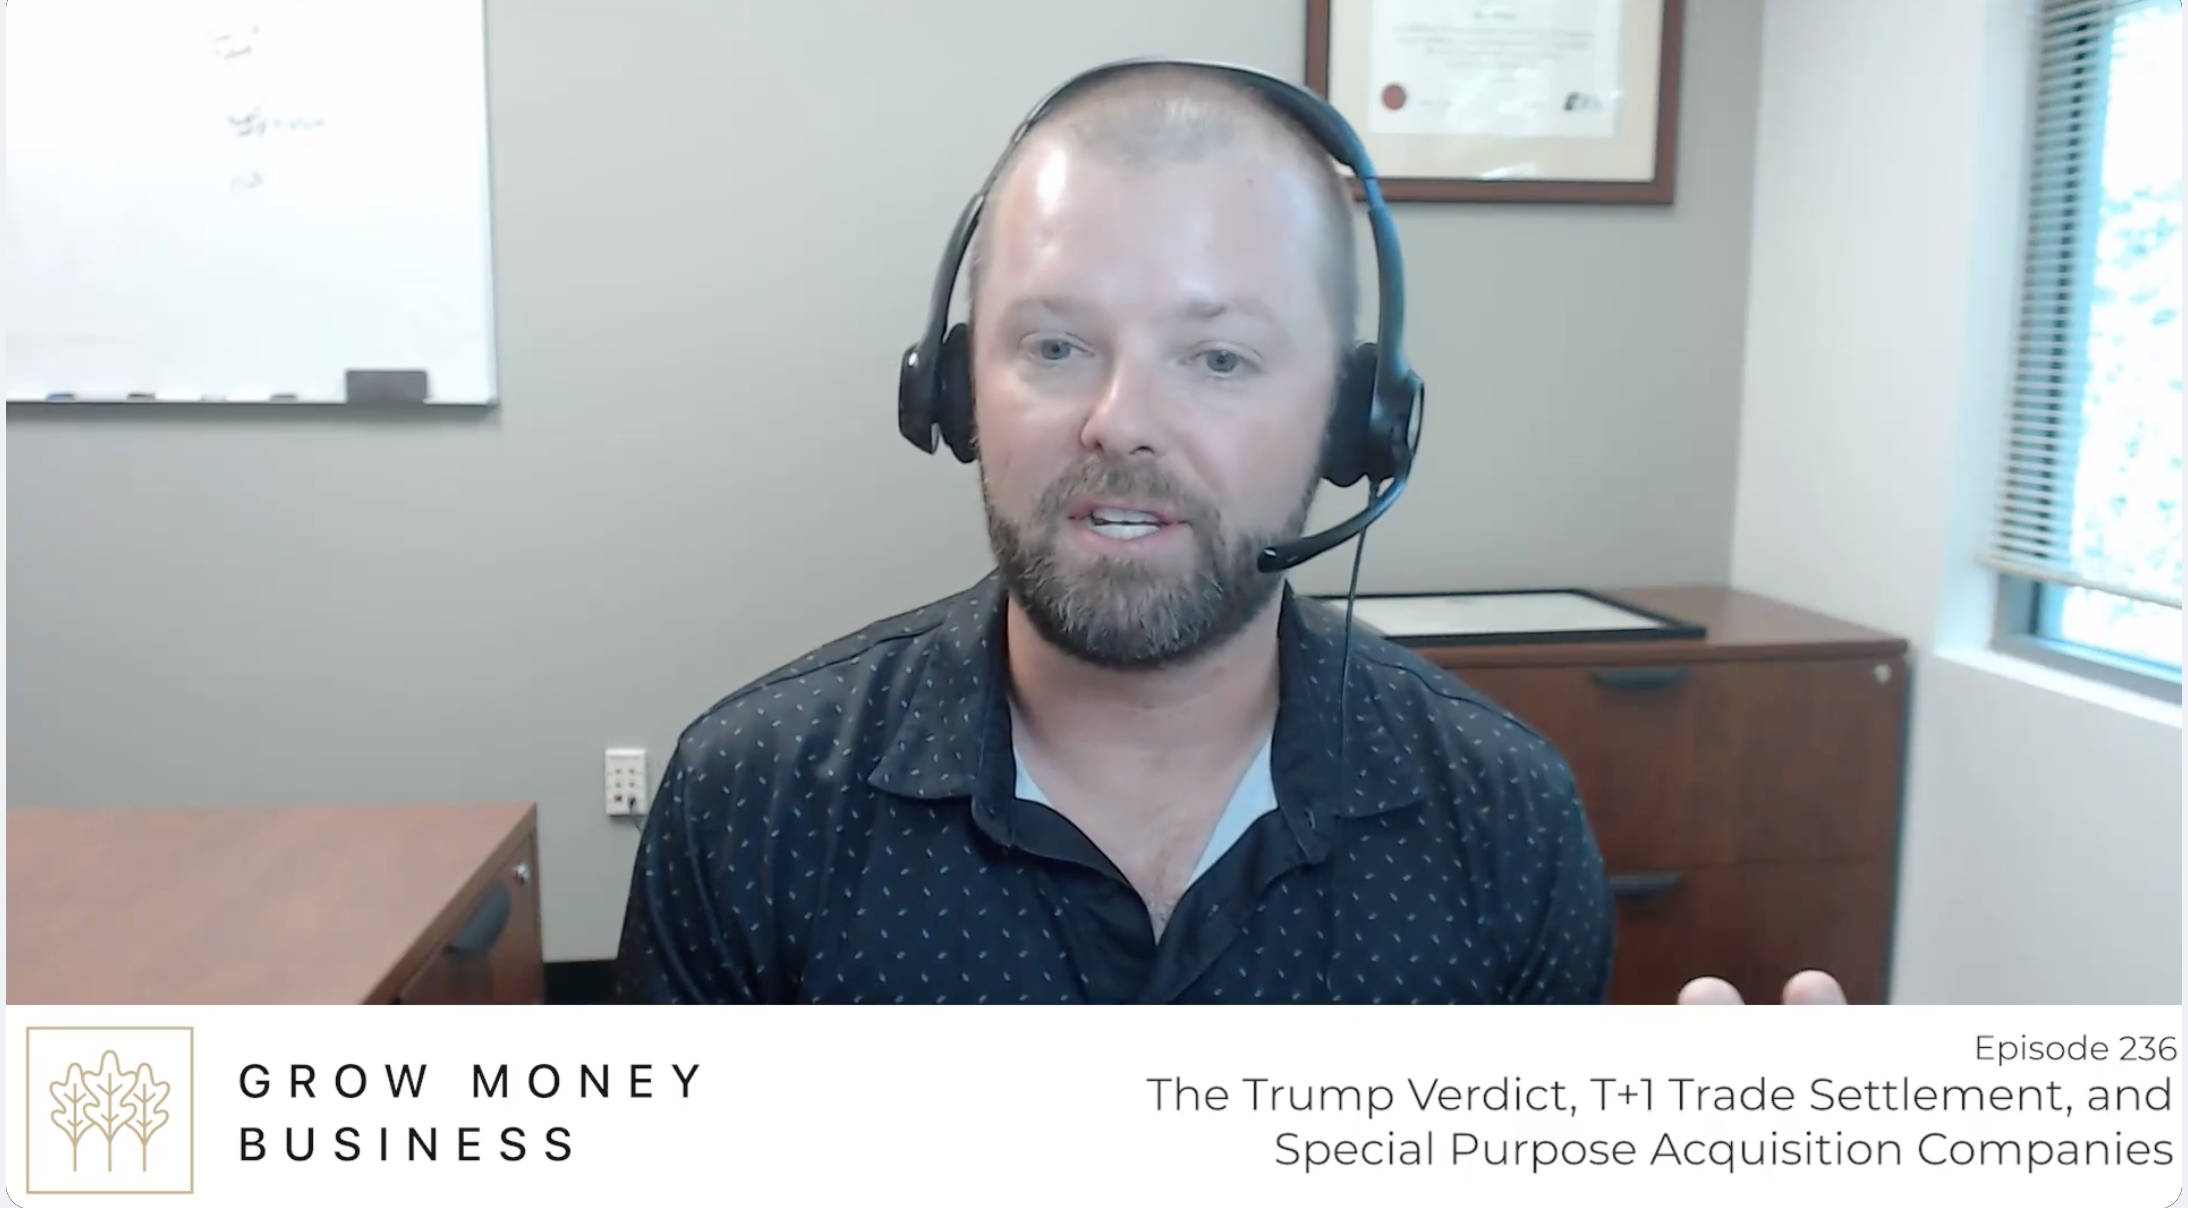 The Trump Verdict, T+1 Trade Settlement, and Special Purpose Acquisition Companies l Ep 236 main image